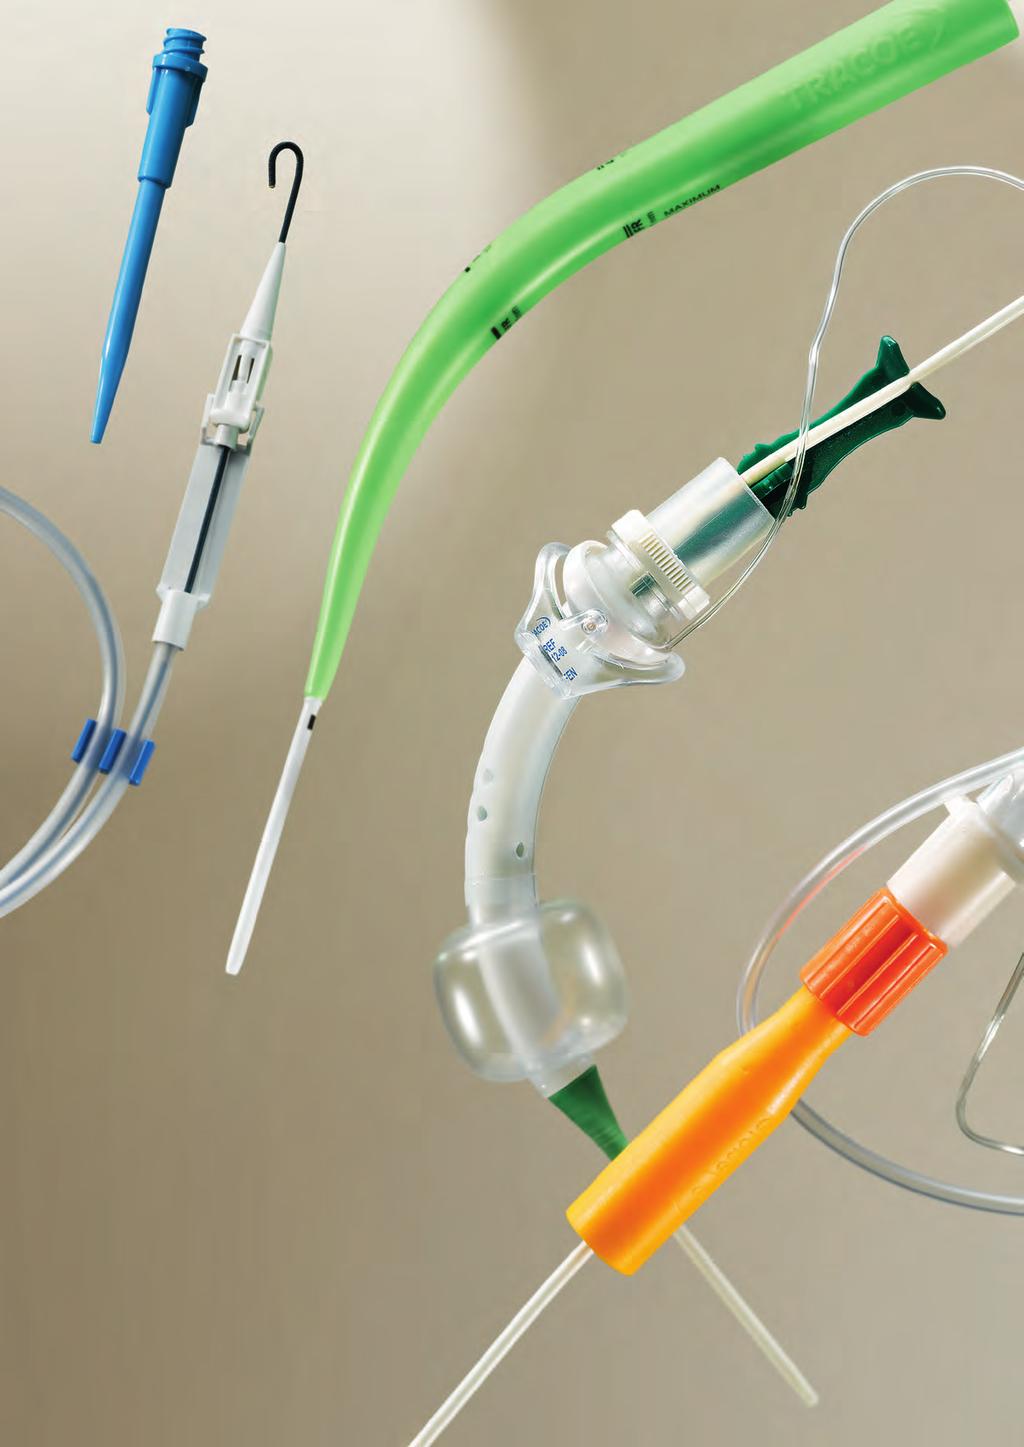 Intensive Care Complete sets for percu taneous dilation tracheostomy.